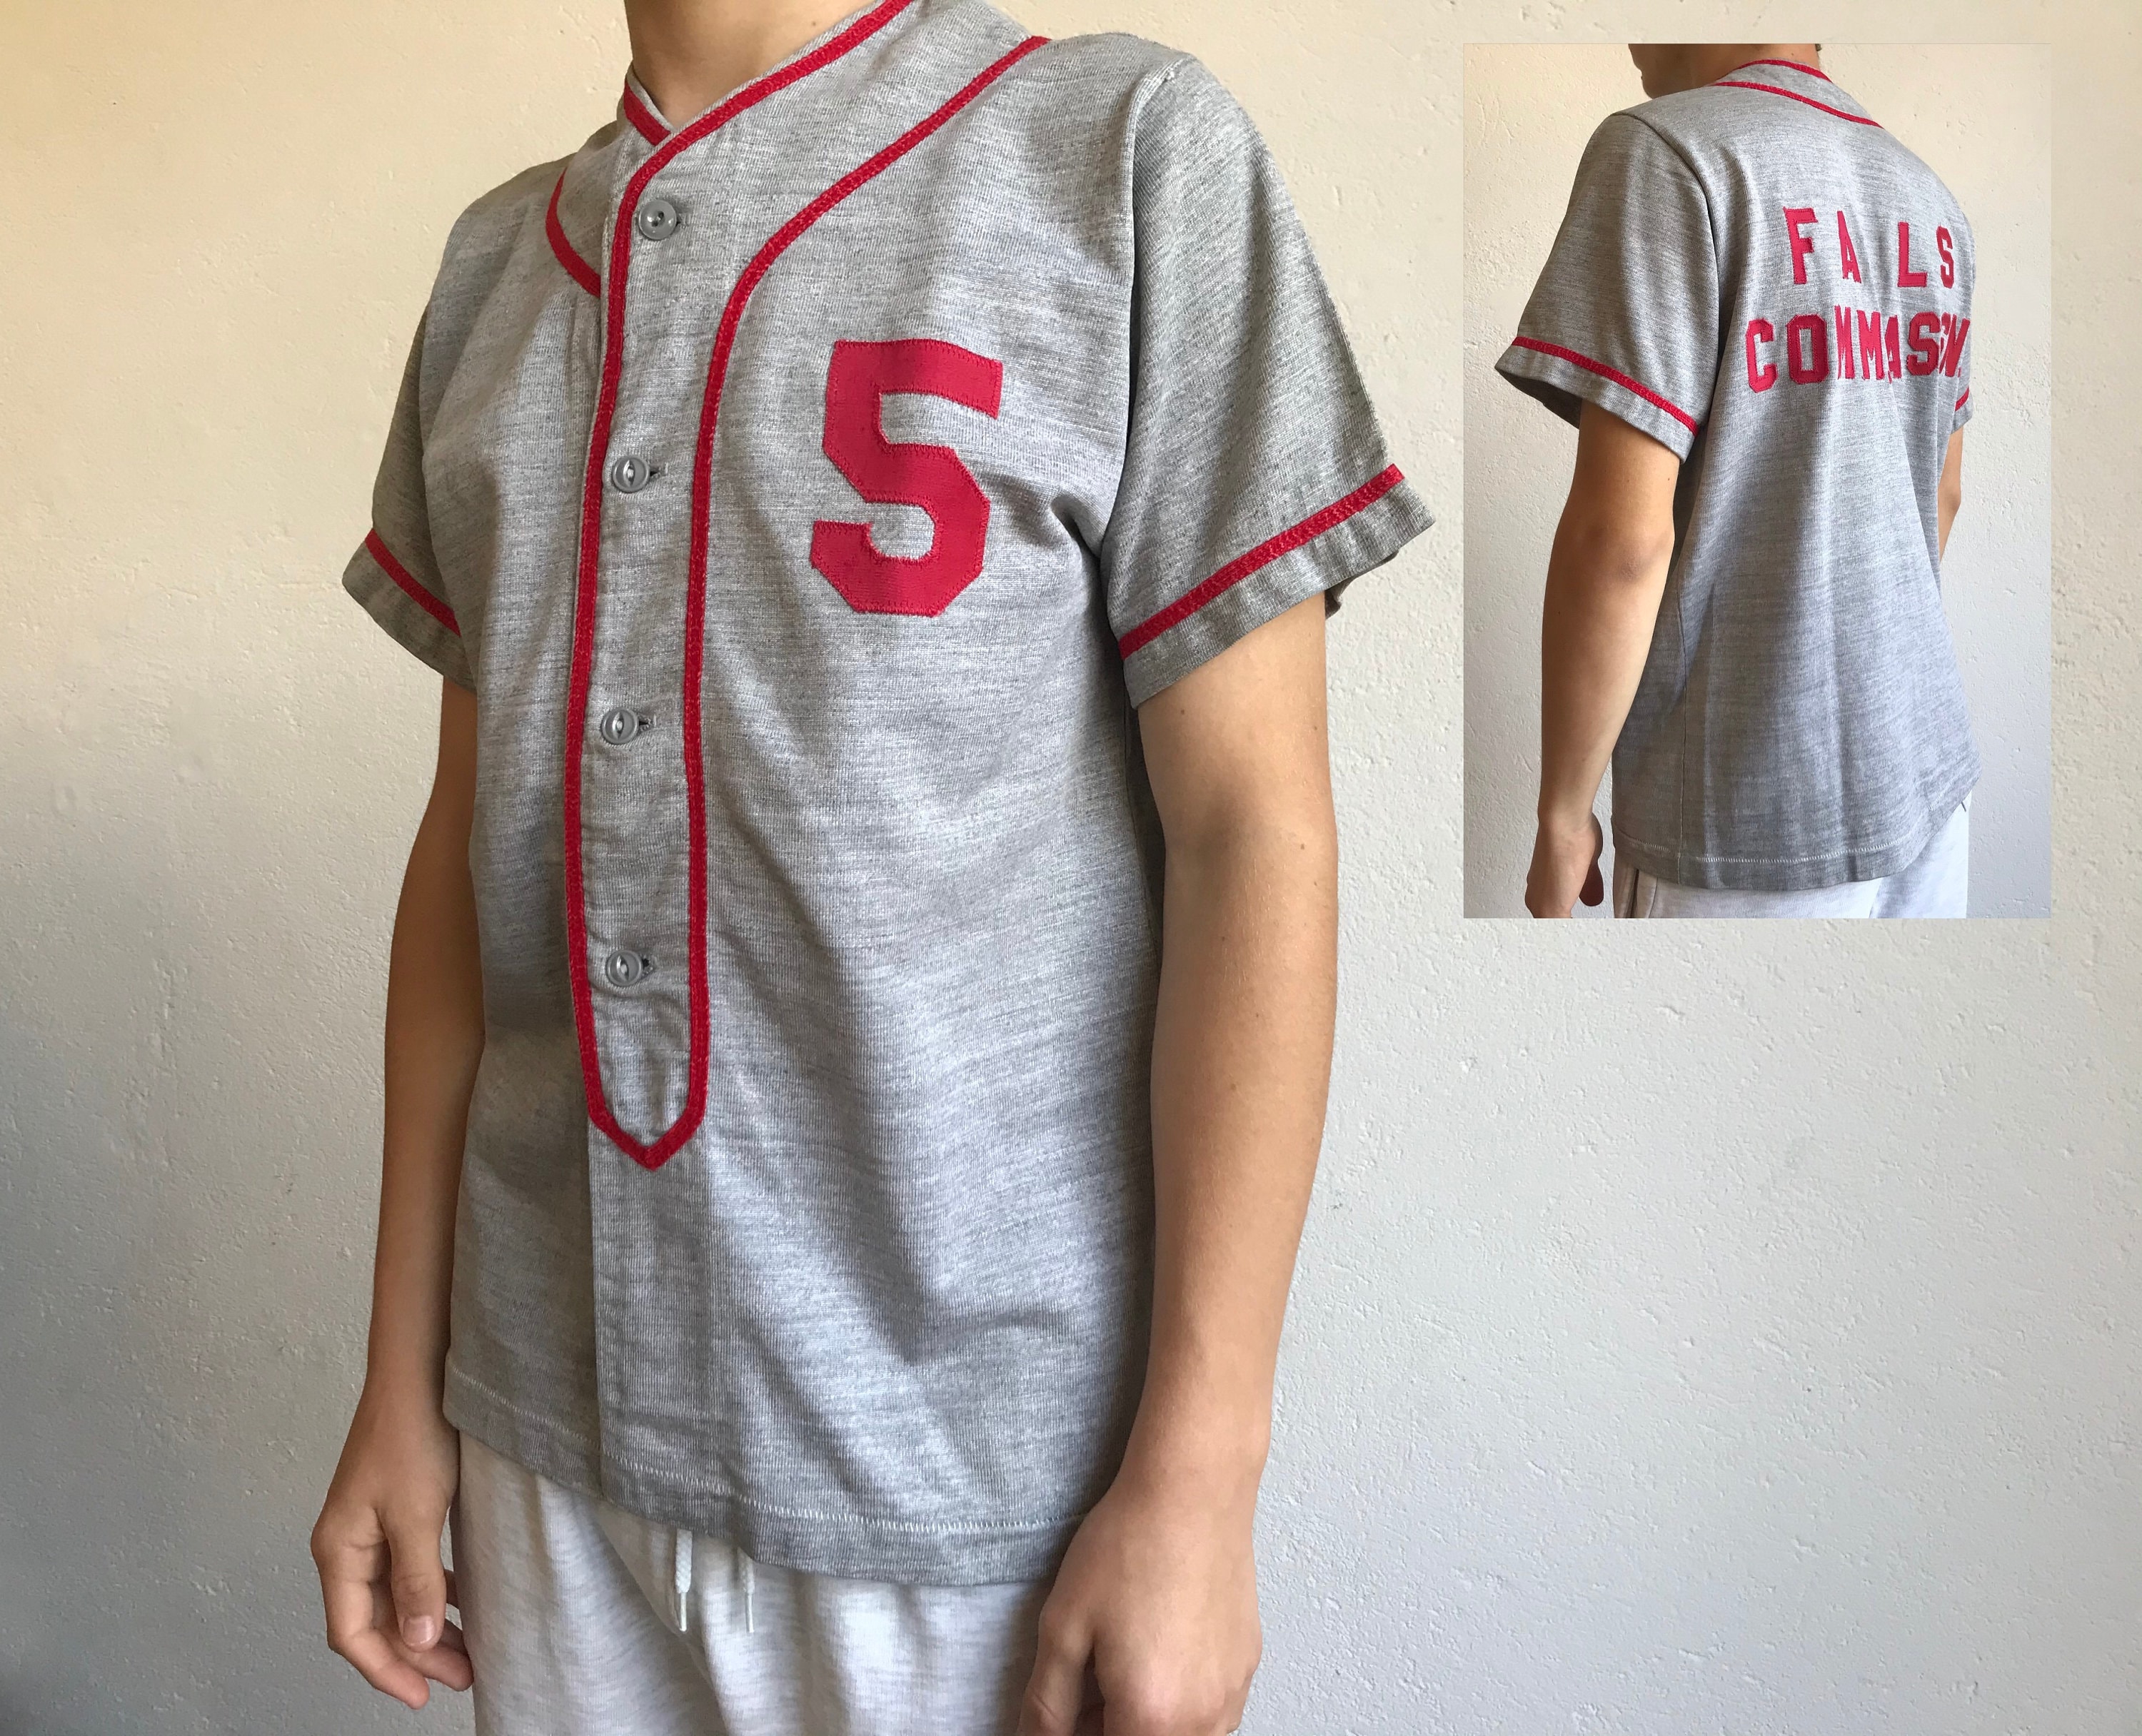 PNBvintage Russell Southern Company | Vintage Baseball Jersey | 1960s | Grey/Red Cotton Blend | Patch | Little League M | Made in USA | Kids Size